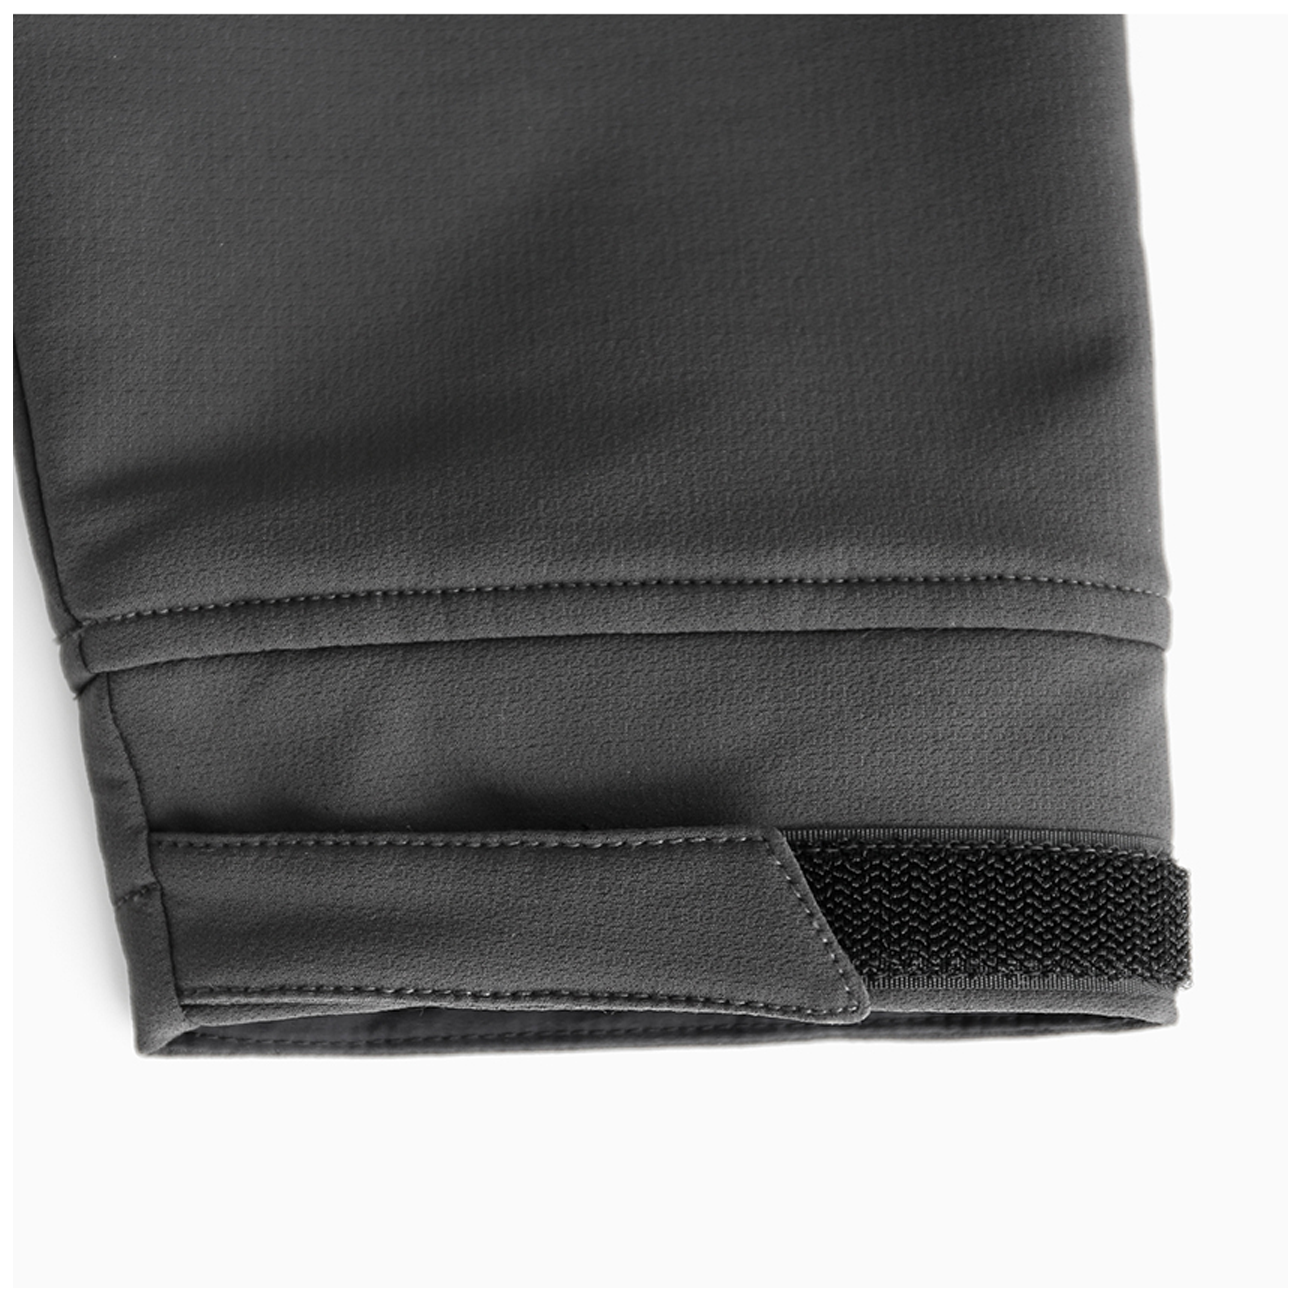 CAYL Thermo Jacket- Charcoal